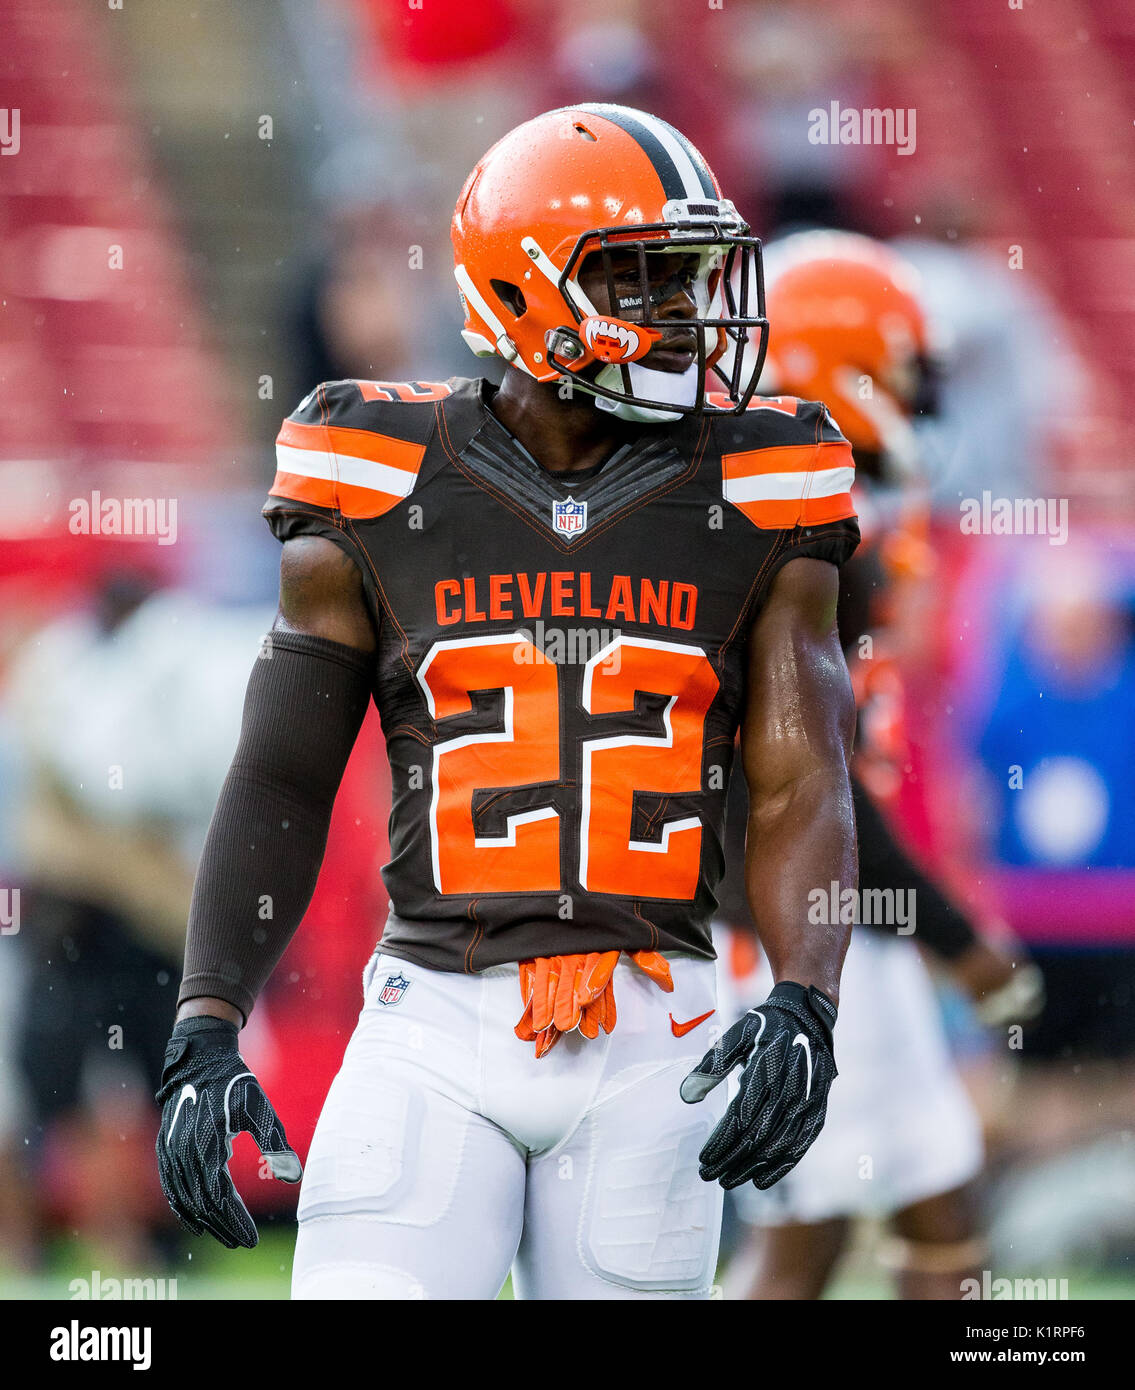 August 26, 2017 - Cleveland Browns linebacker Jabrill Peppers (22) before  the game between the Cleveland Browns and the Tampa Bay Buccaneers at  Raymond James Stadium in Tampa, Florida. Del Mecum/CSM Stock Photo - Alamy